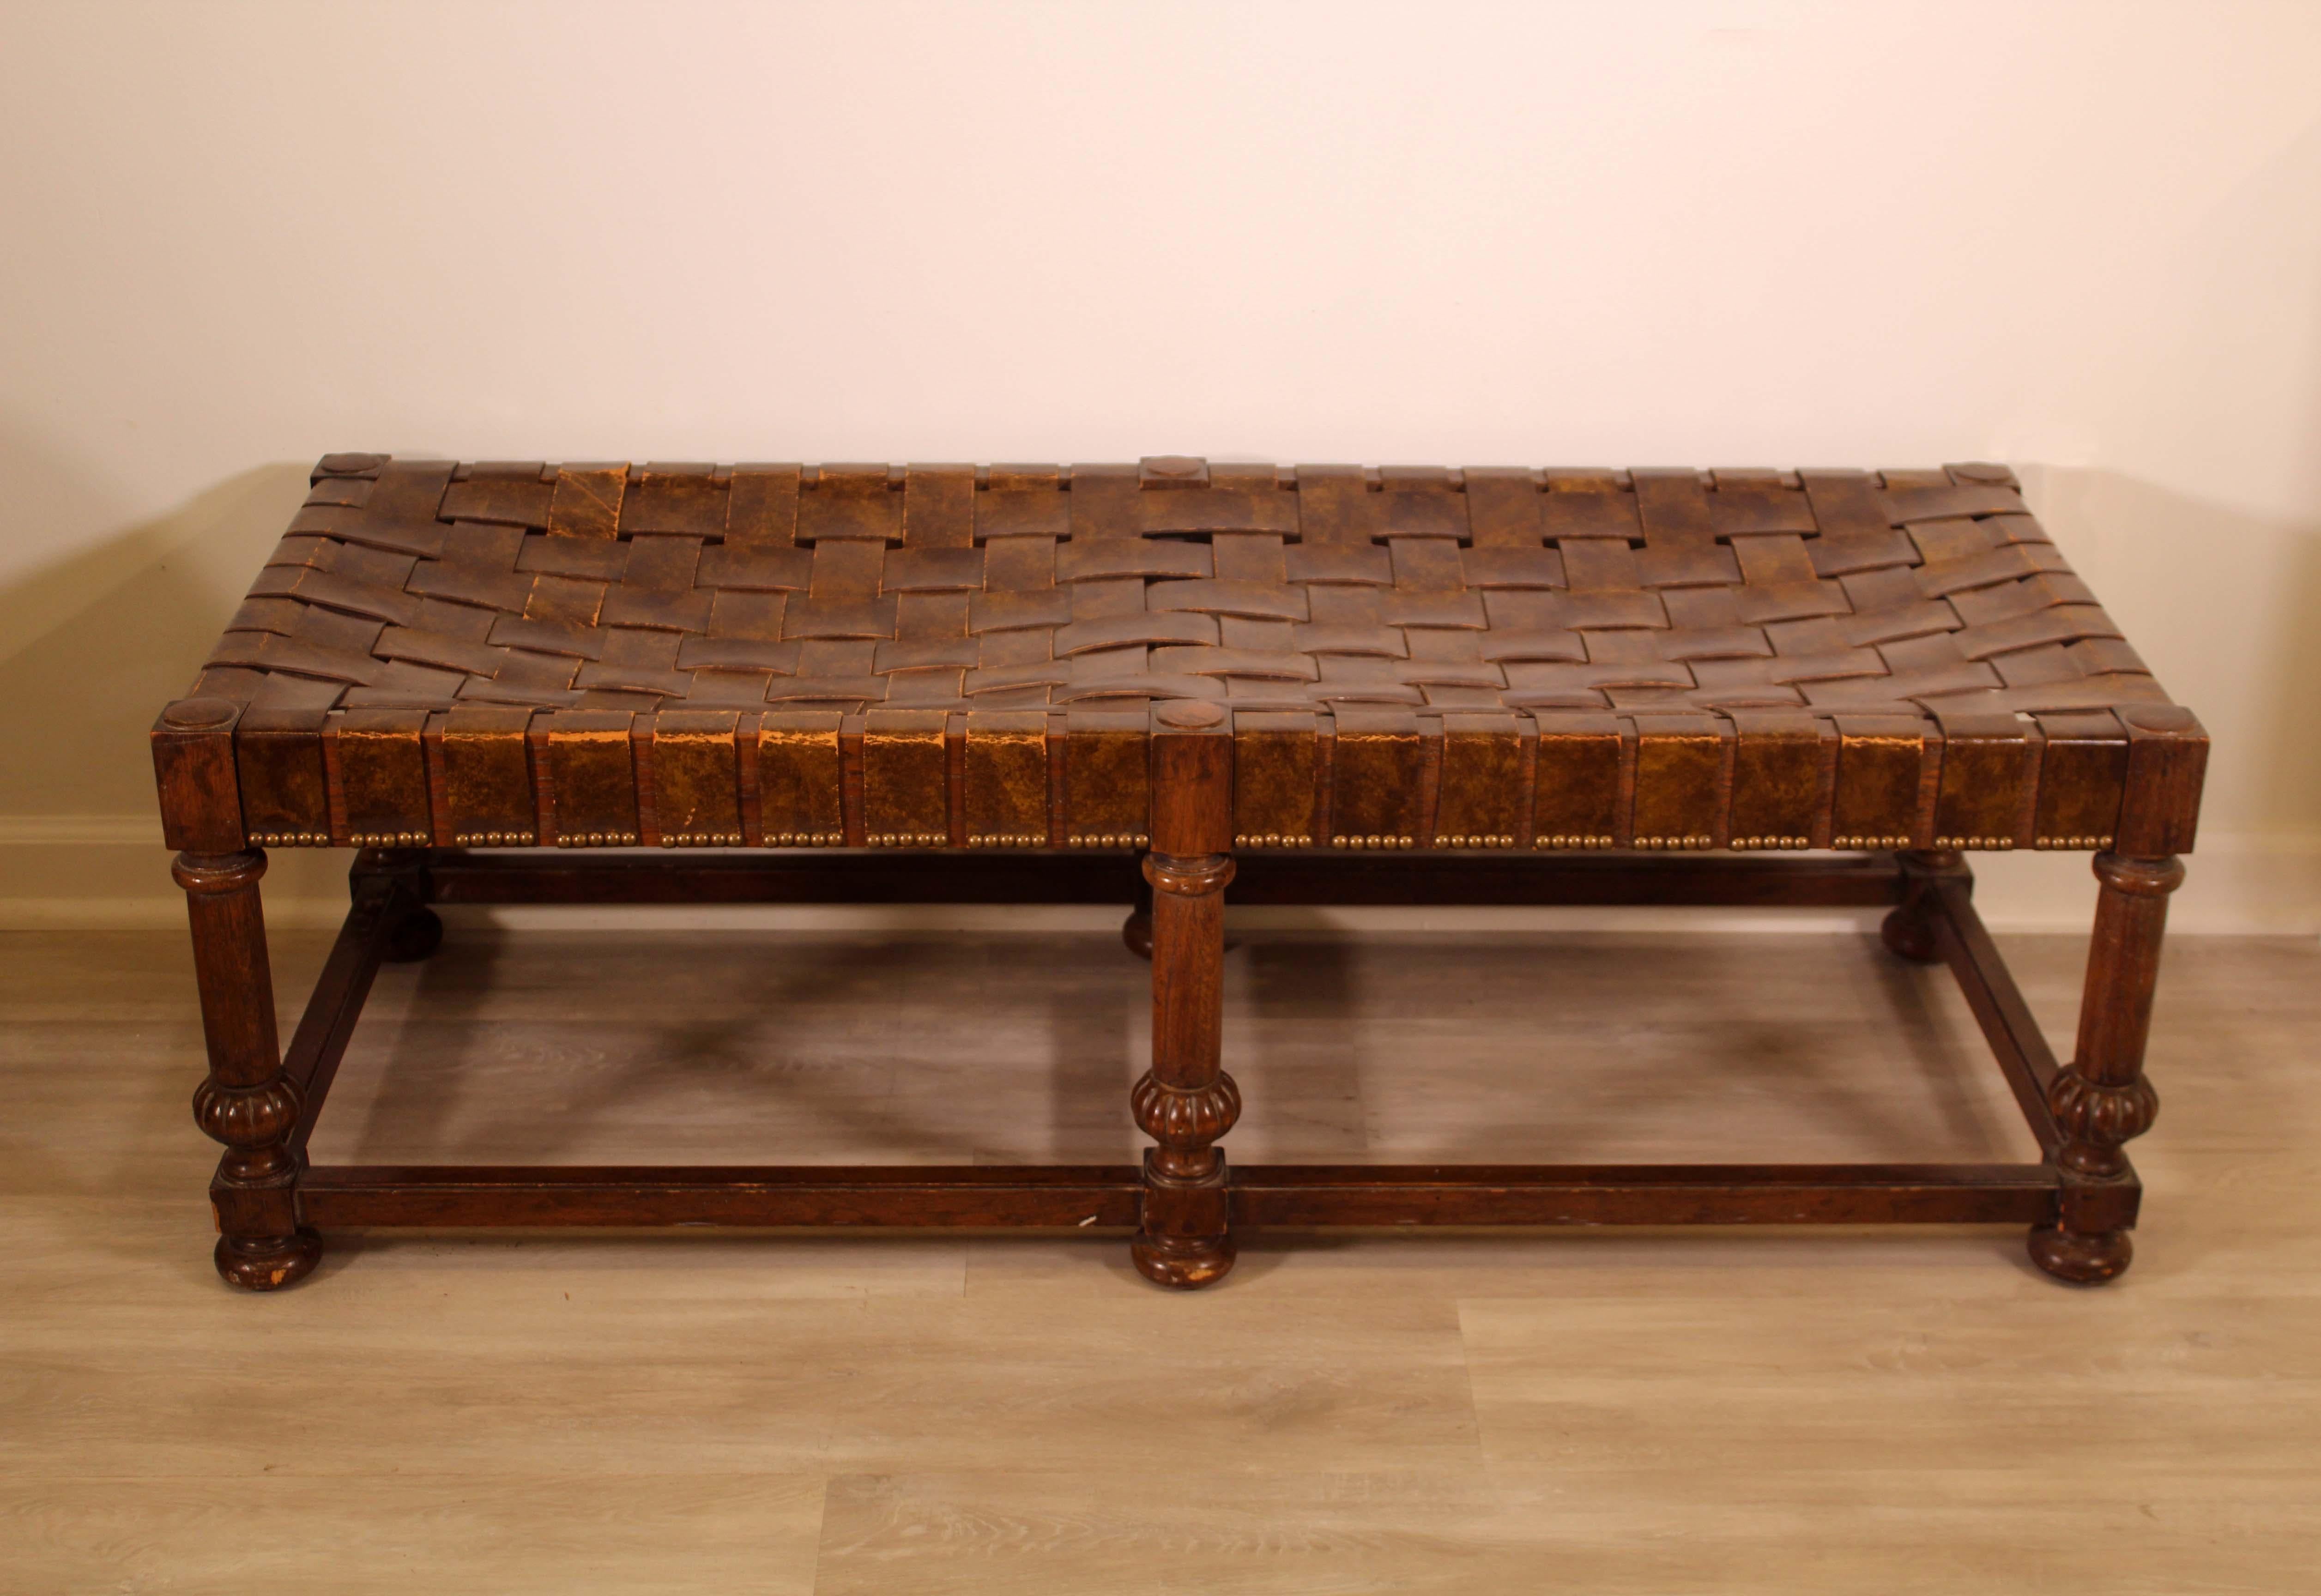 This lovely leather woven Heritage Grand Tour bench. In good condition. Dimensions: 50